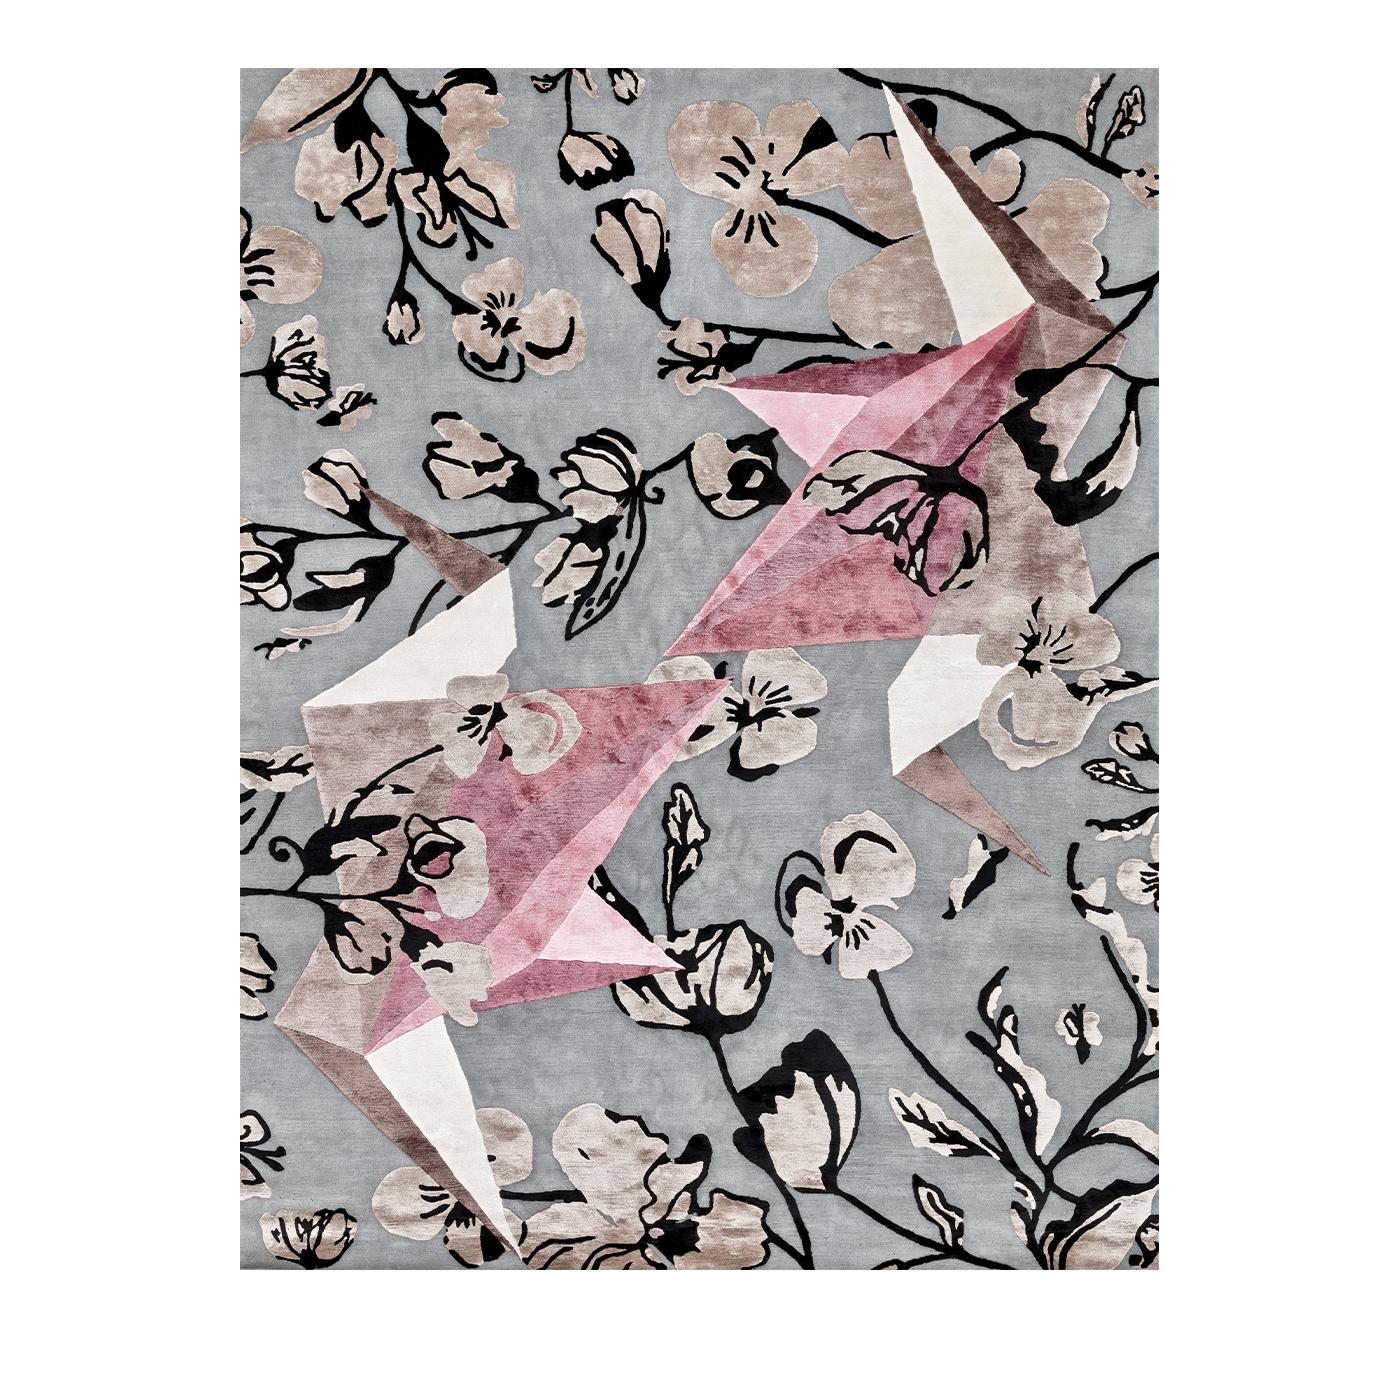 In this spectacular Flying Gru rug, two origami style cranes fly amongst Japanese flowers for a symbolic design of longevity, good luck and quality. Composed of 50% silk and 50% Himalayan wool, this delightful accessory will add flair and elegance